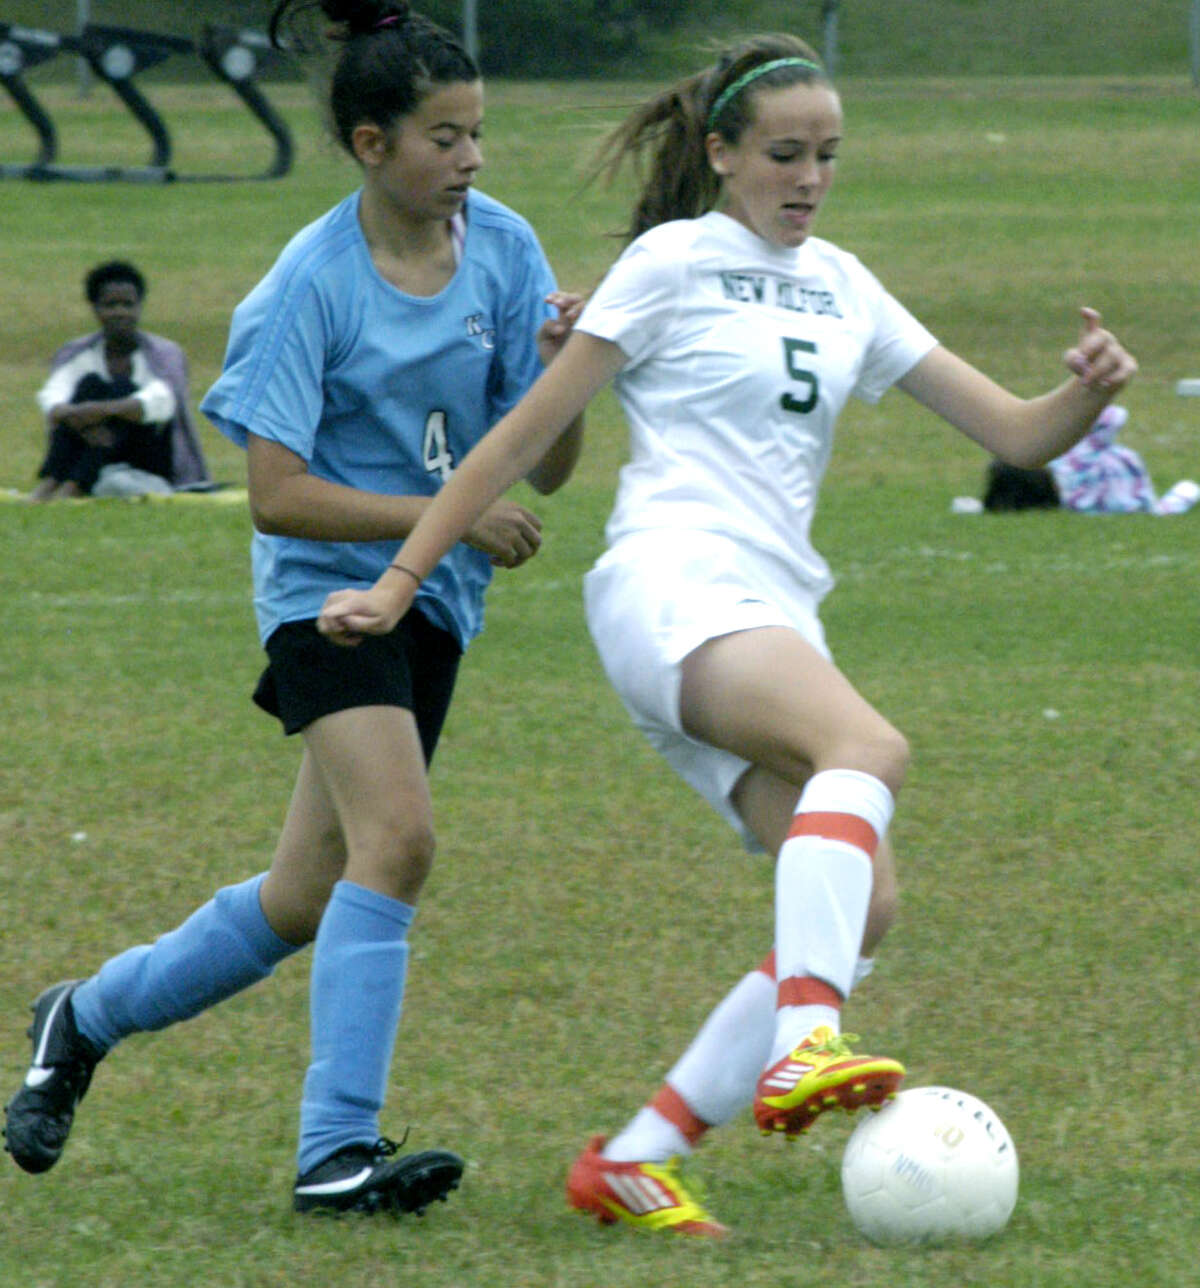 The Green Wave's Rachel Weir demonstrates her foot skills to a rival during New Milford High School girls' soccer's Sept. 22, 2012 match vs. Kolbe Cathedral at NMHS.